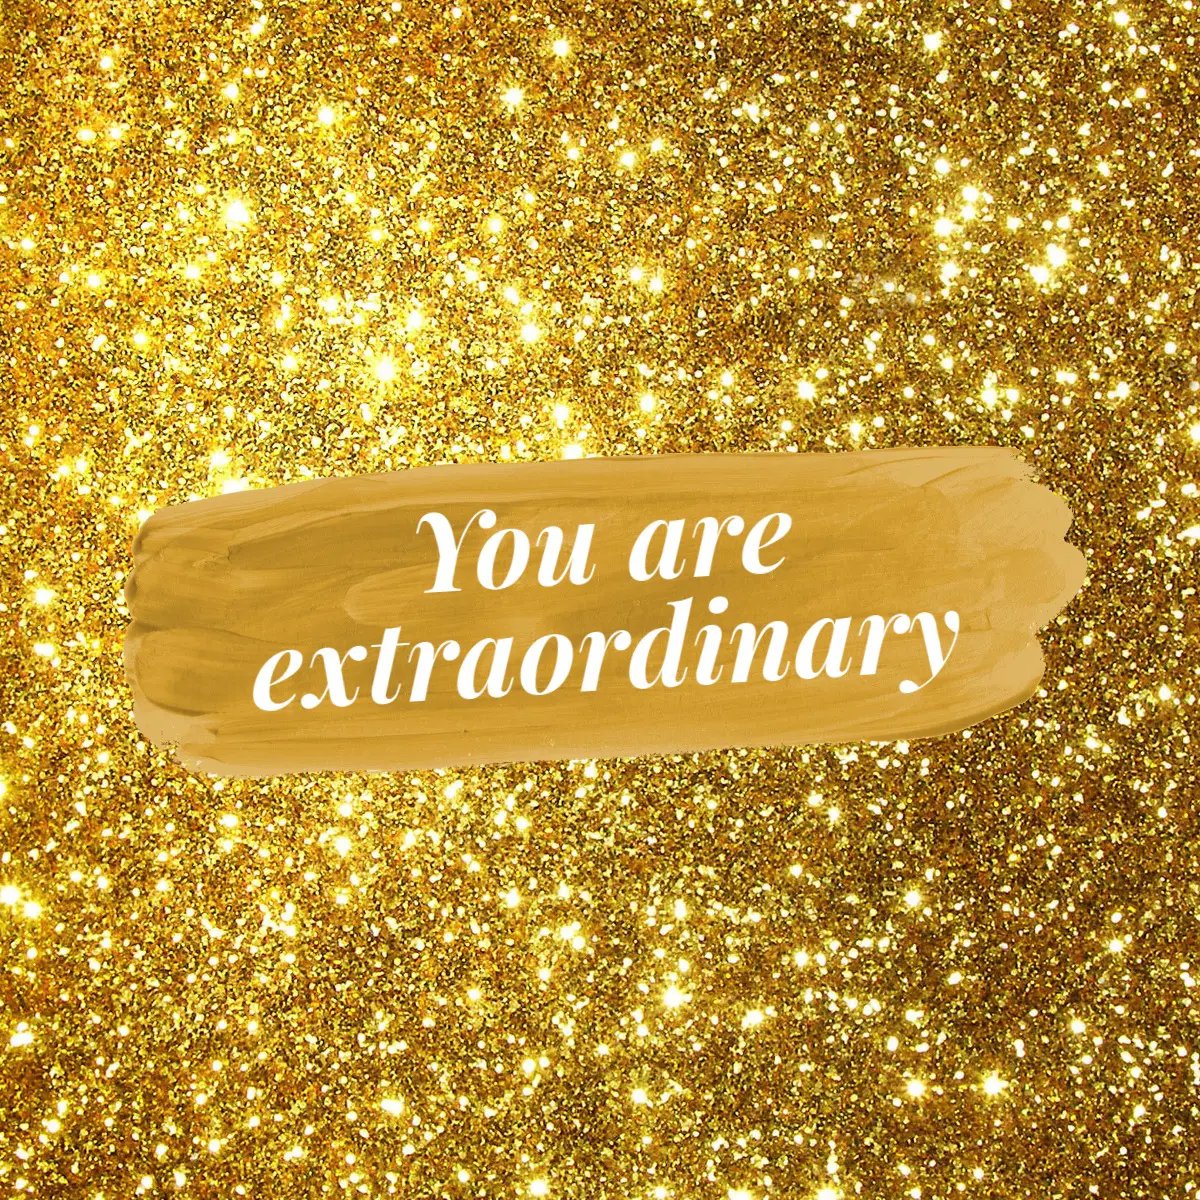 You are extraordinary